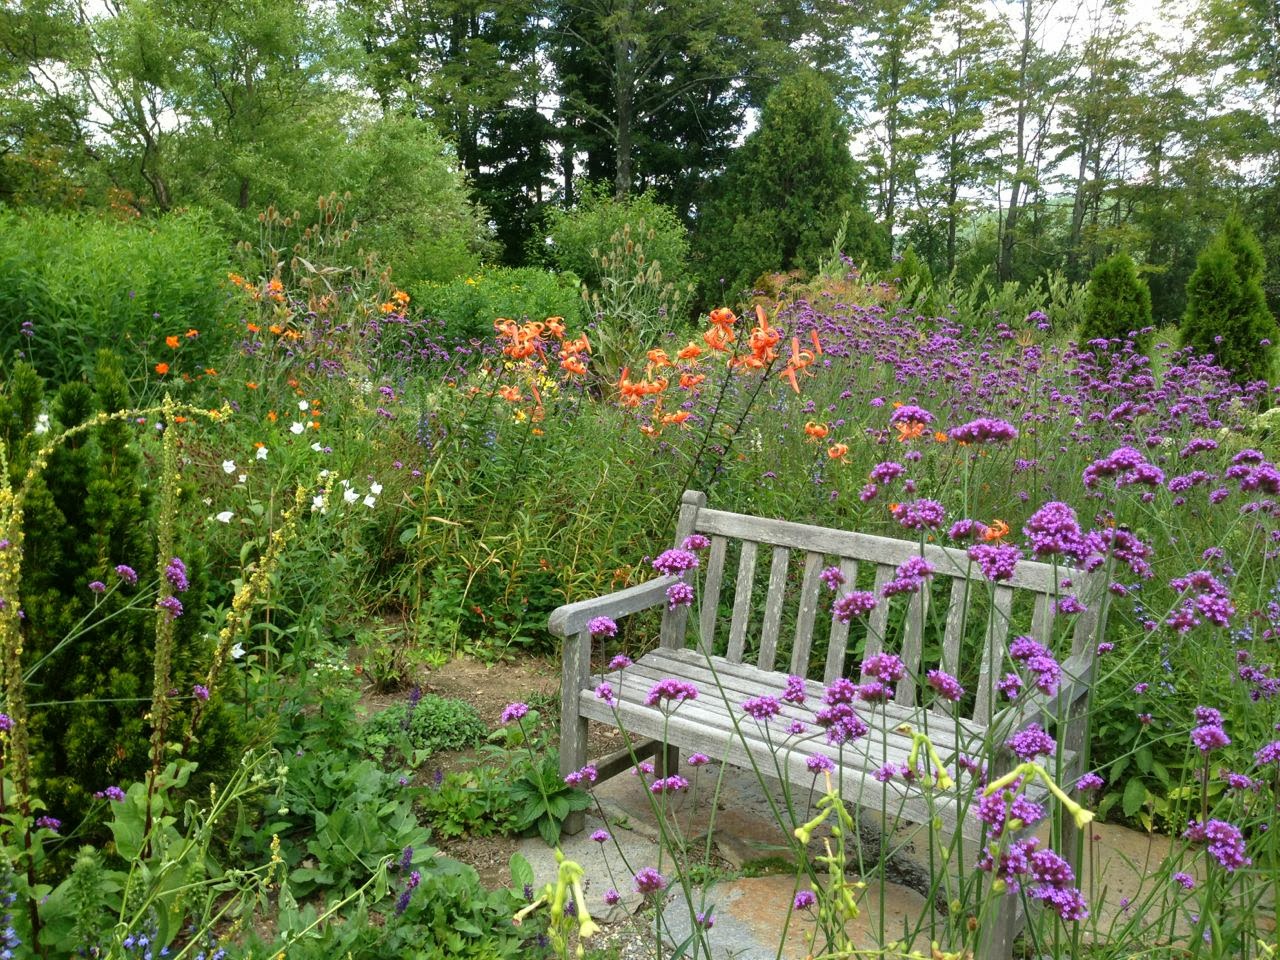 Collage of Life: A Country Garden in Vermont